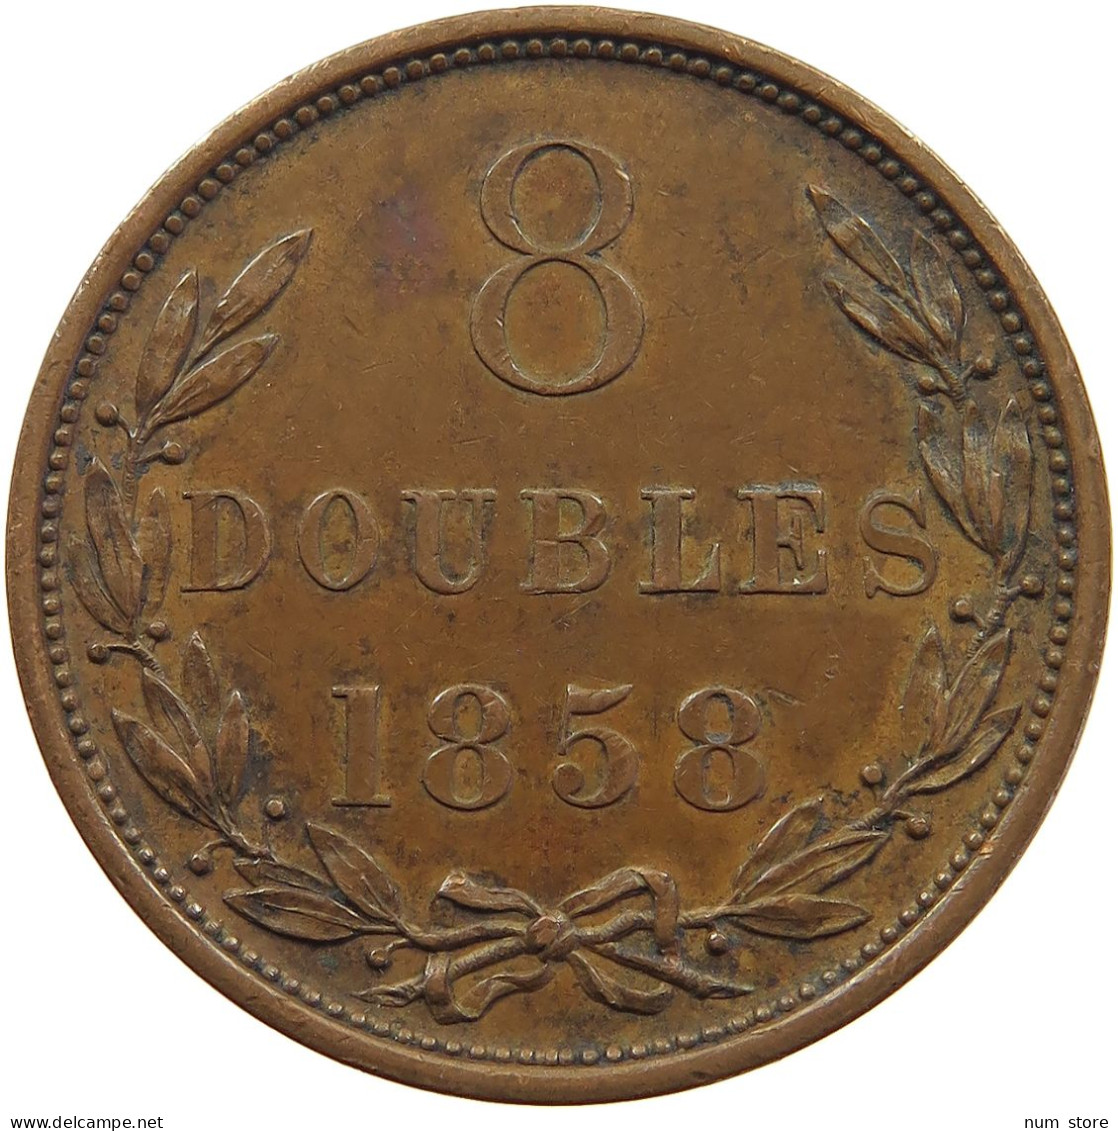 GUERNSEY 8 DOUBLES 1858  #sm05 0279 - Guernesey